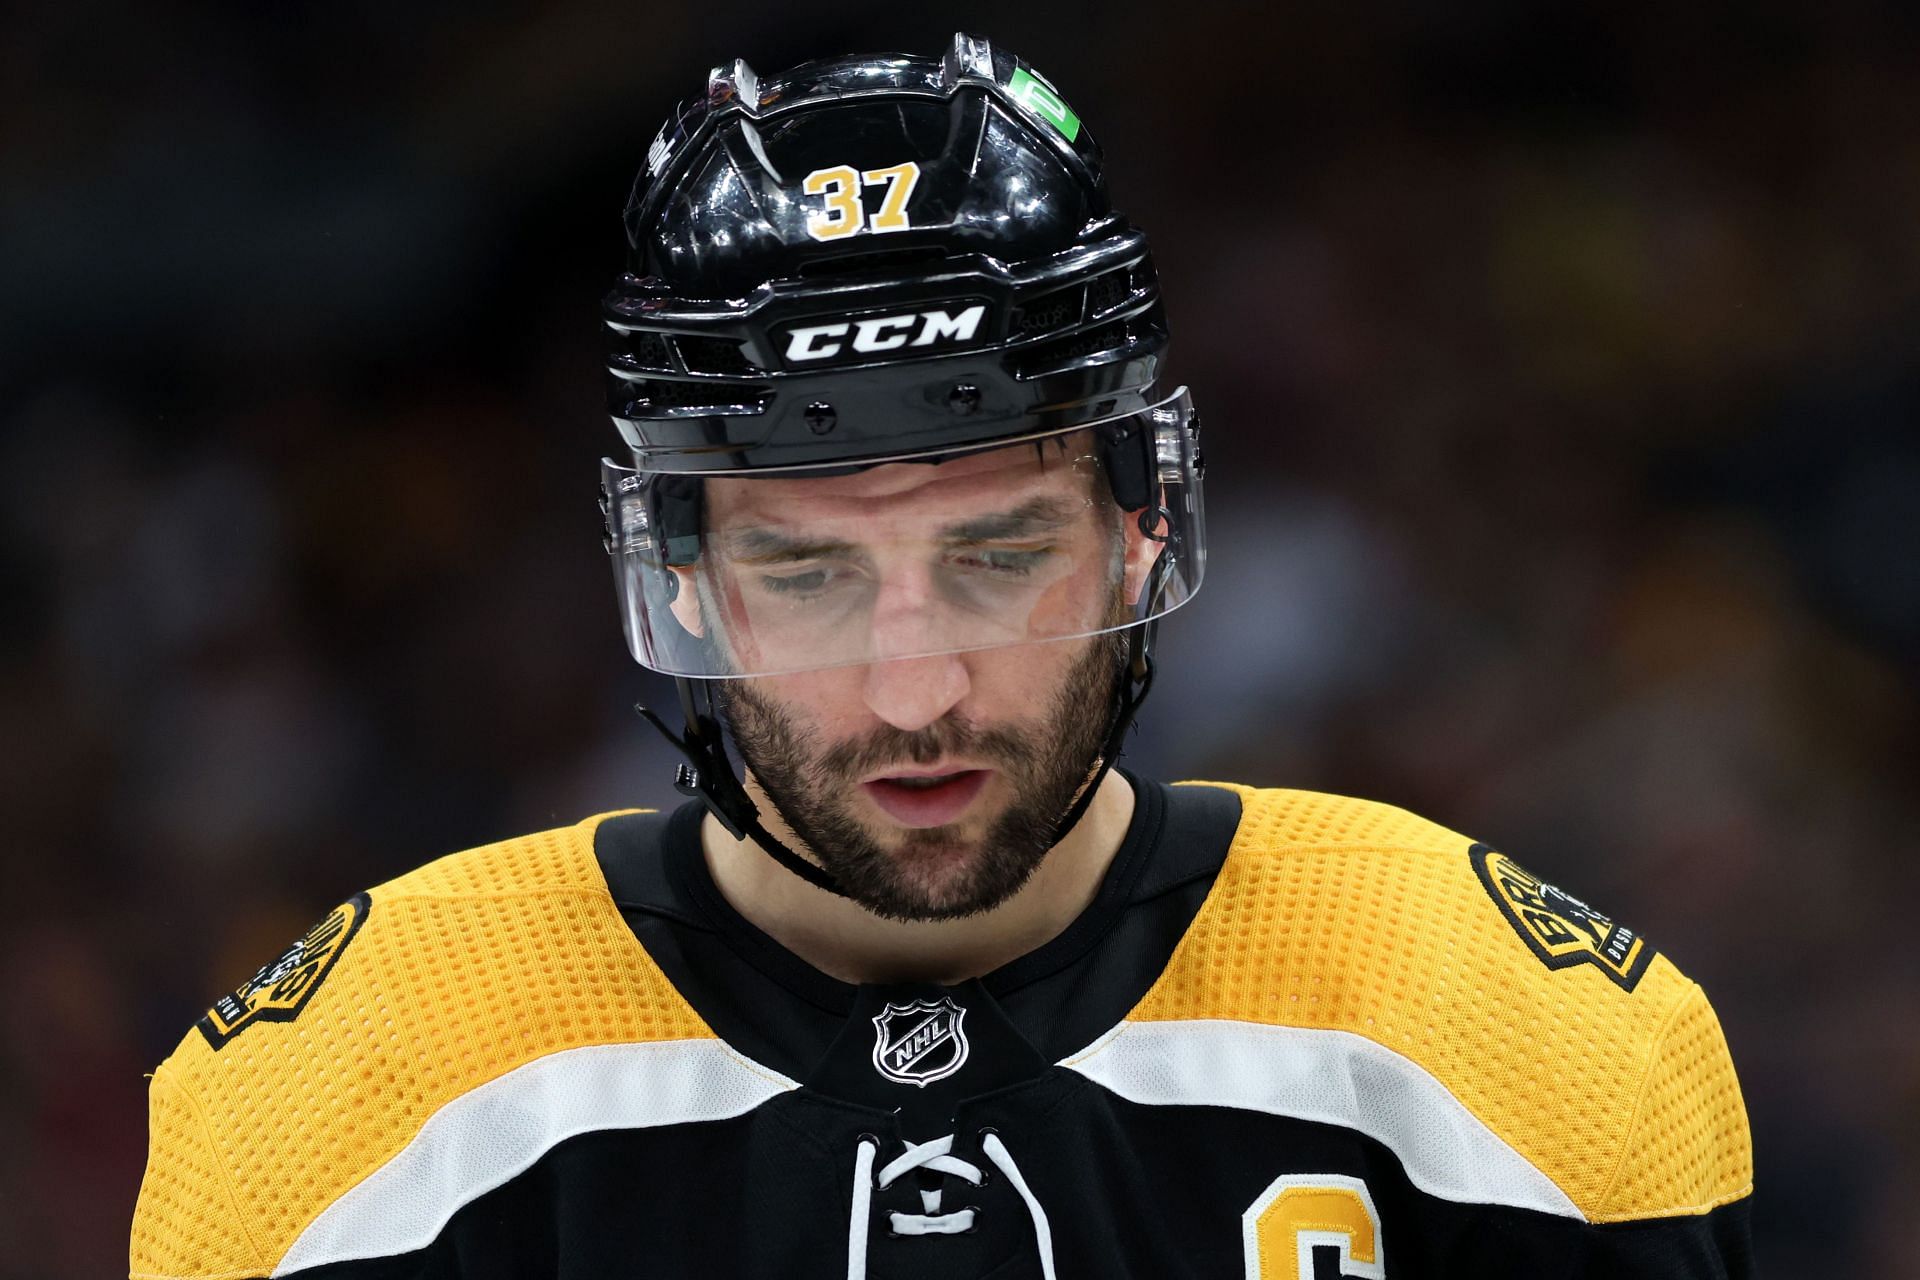 Boston Bruins: Is Patrice Bergeron a first ballot Hall of Famer?